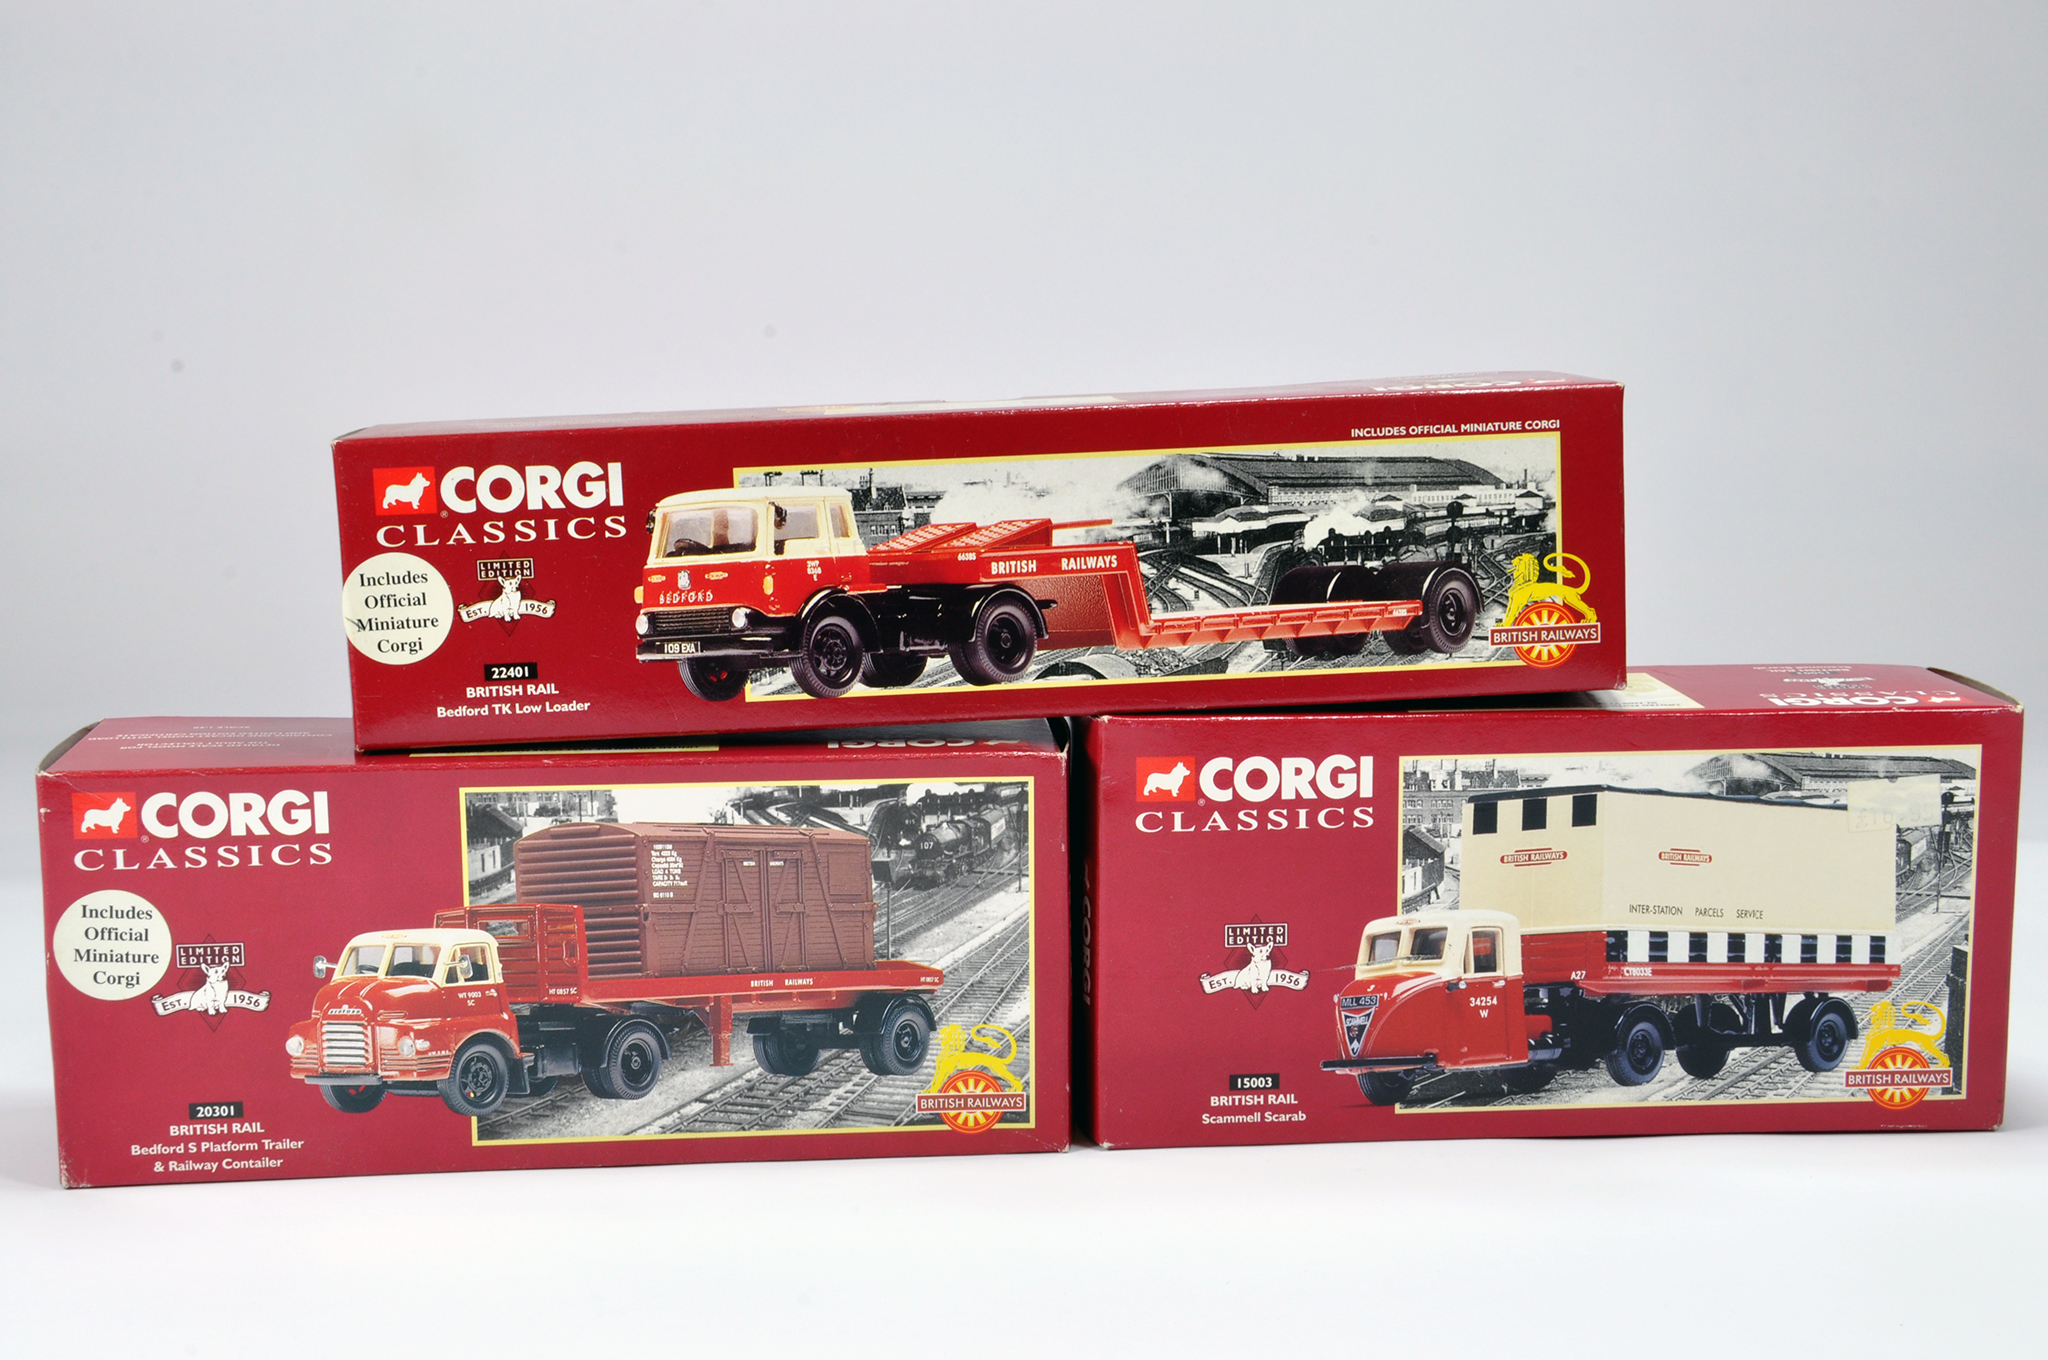 Corgi Commercial Truck Diecast Group. Comprising No. 22401 Bedford TK, 20301 Bedford S and 15003